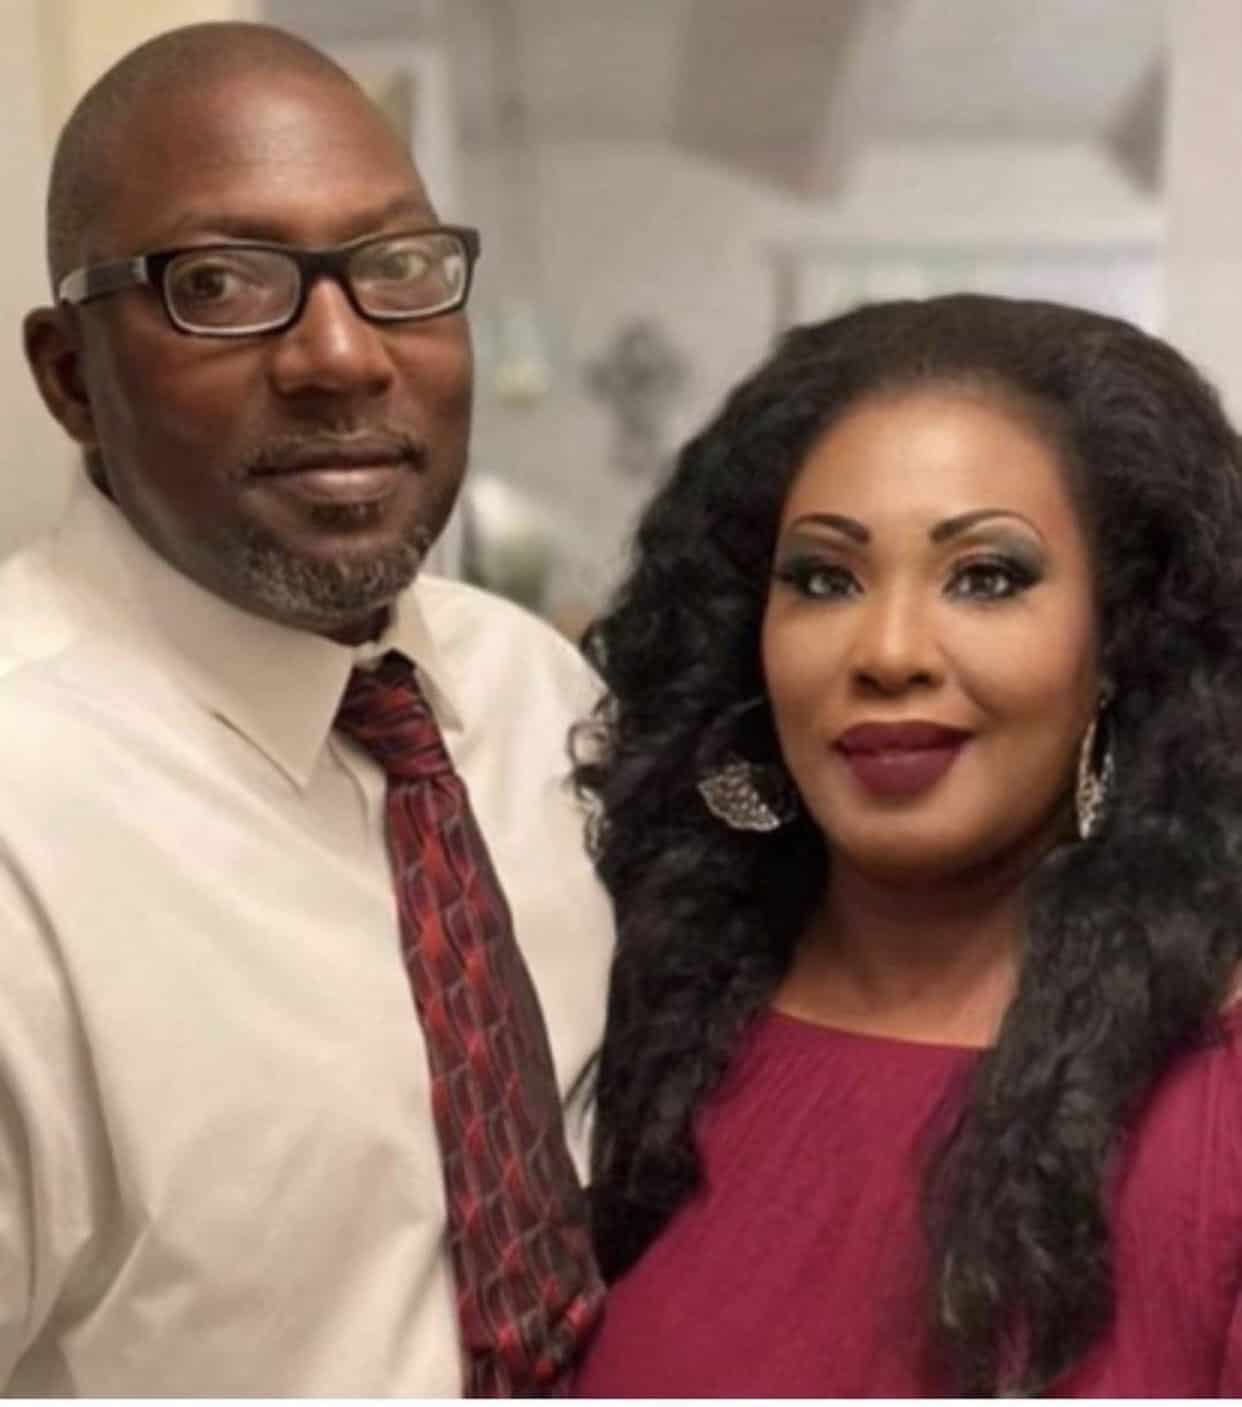 A Video Of An Unarmed Pastor From Killeen, Texas Who Was Fatally Shot By Police Following A Mental Health Call Is Going Viral